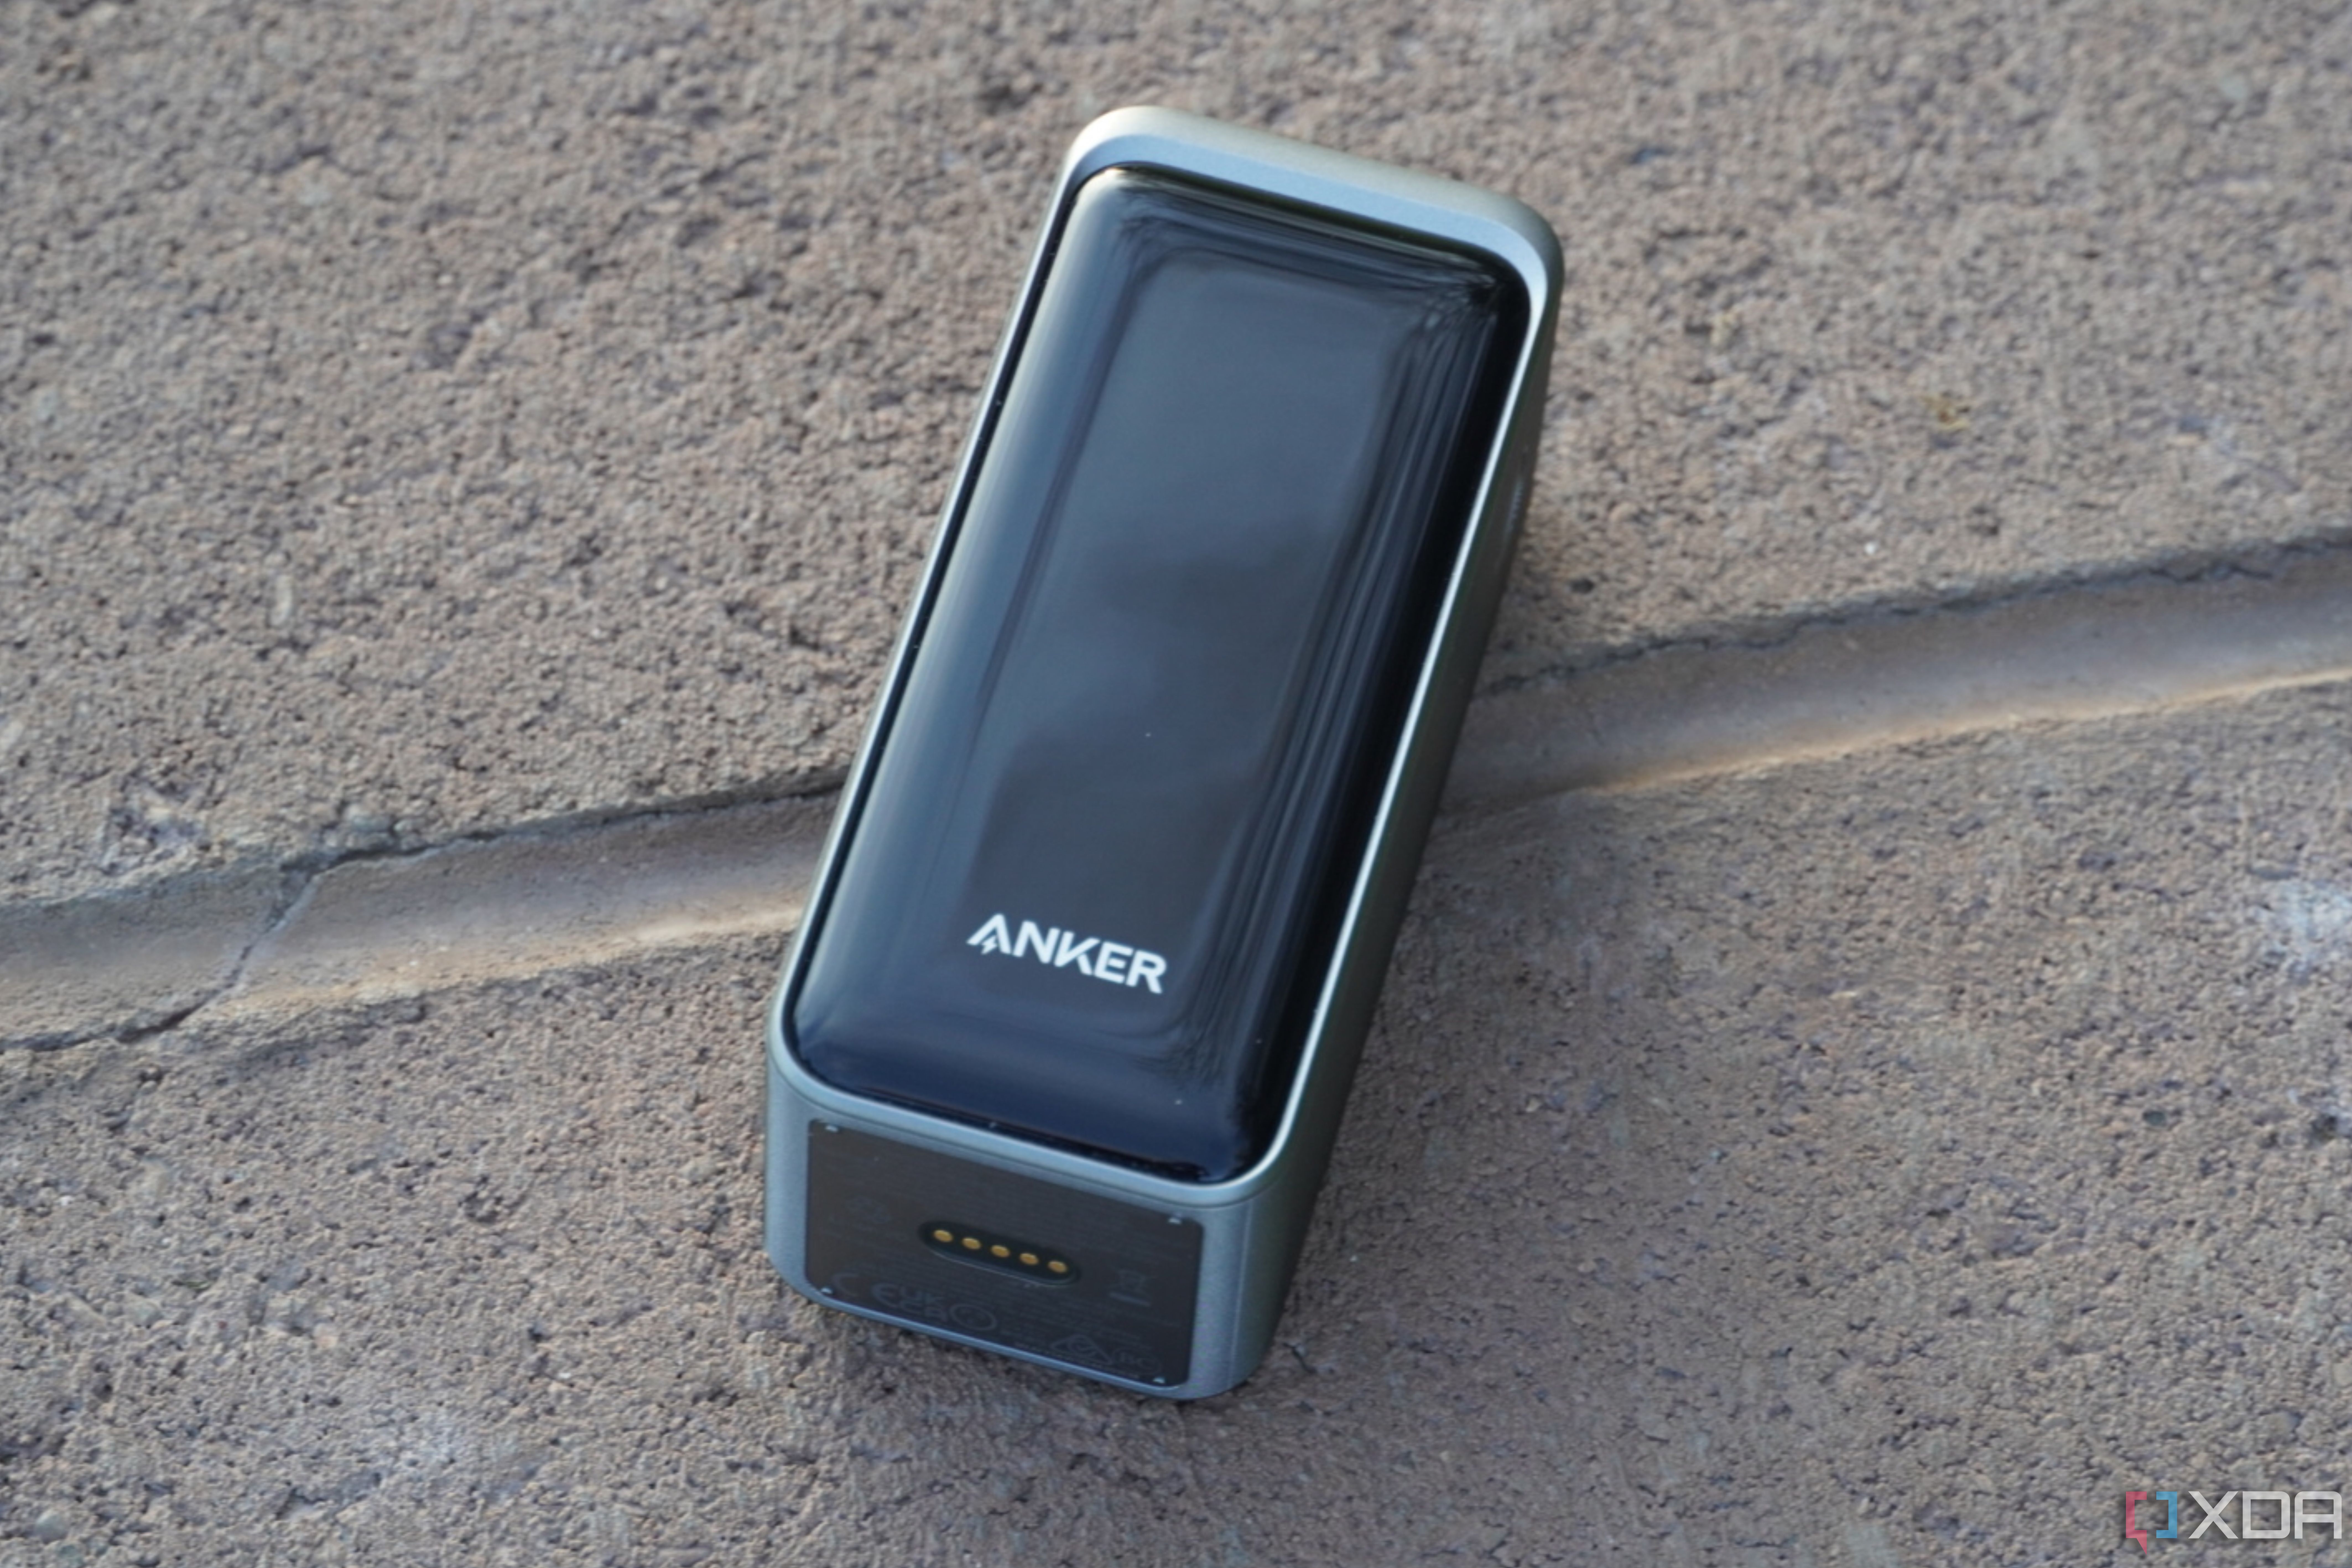 I travelled 7428km with the Anker Prime Power Bank on a single